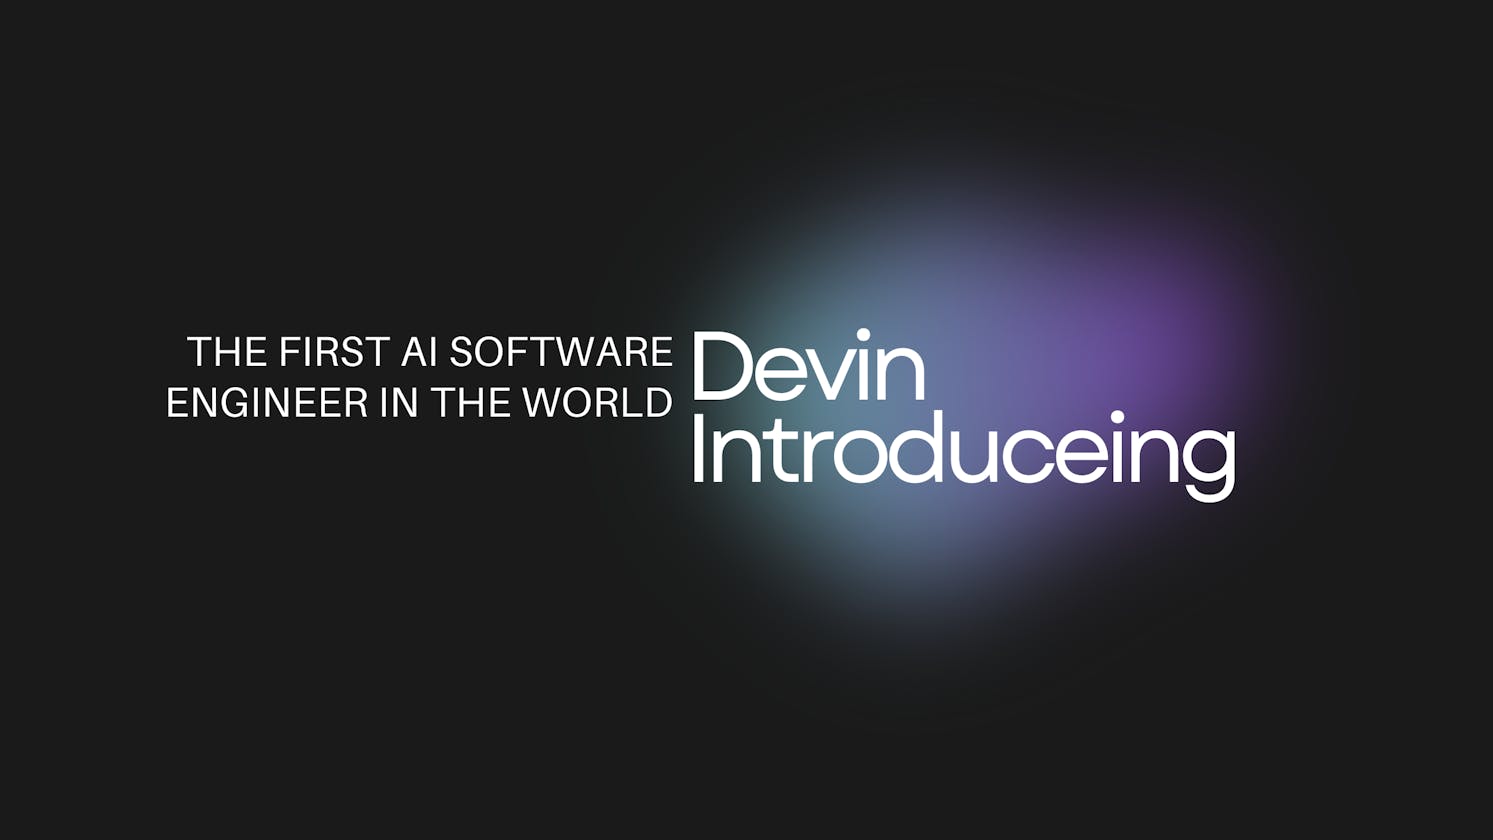 Introduction to DEVIN AI: The First AI Software Engineer in the World